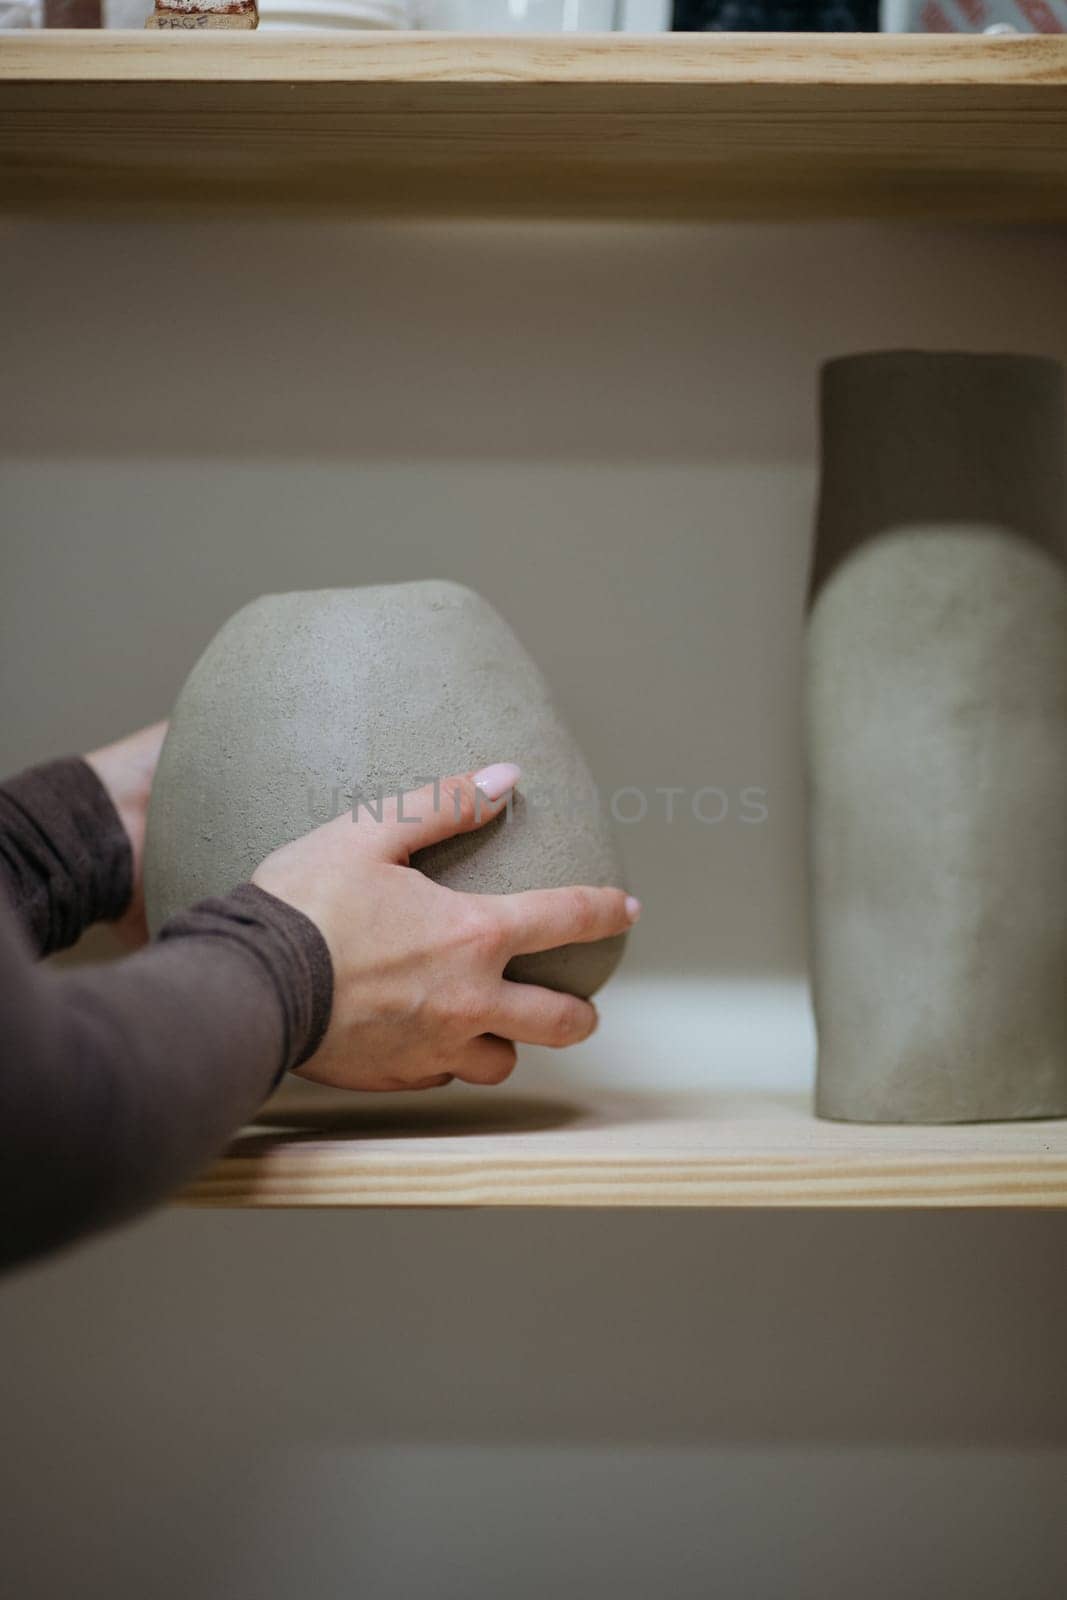 A hand gently grips a sandy-textured ceramic vase on a wooden shelf.